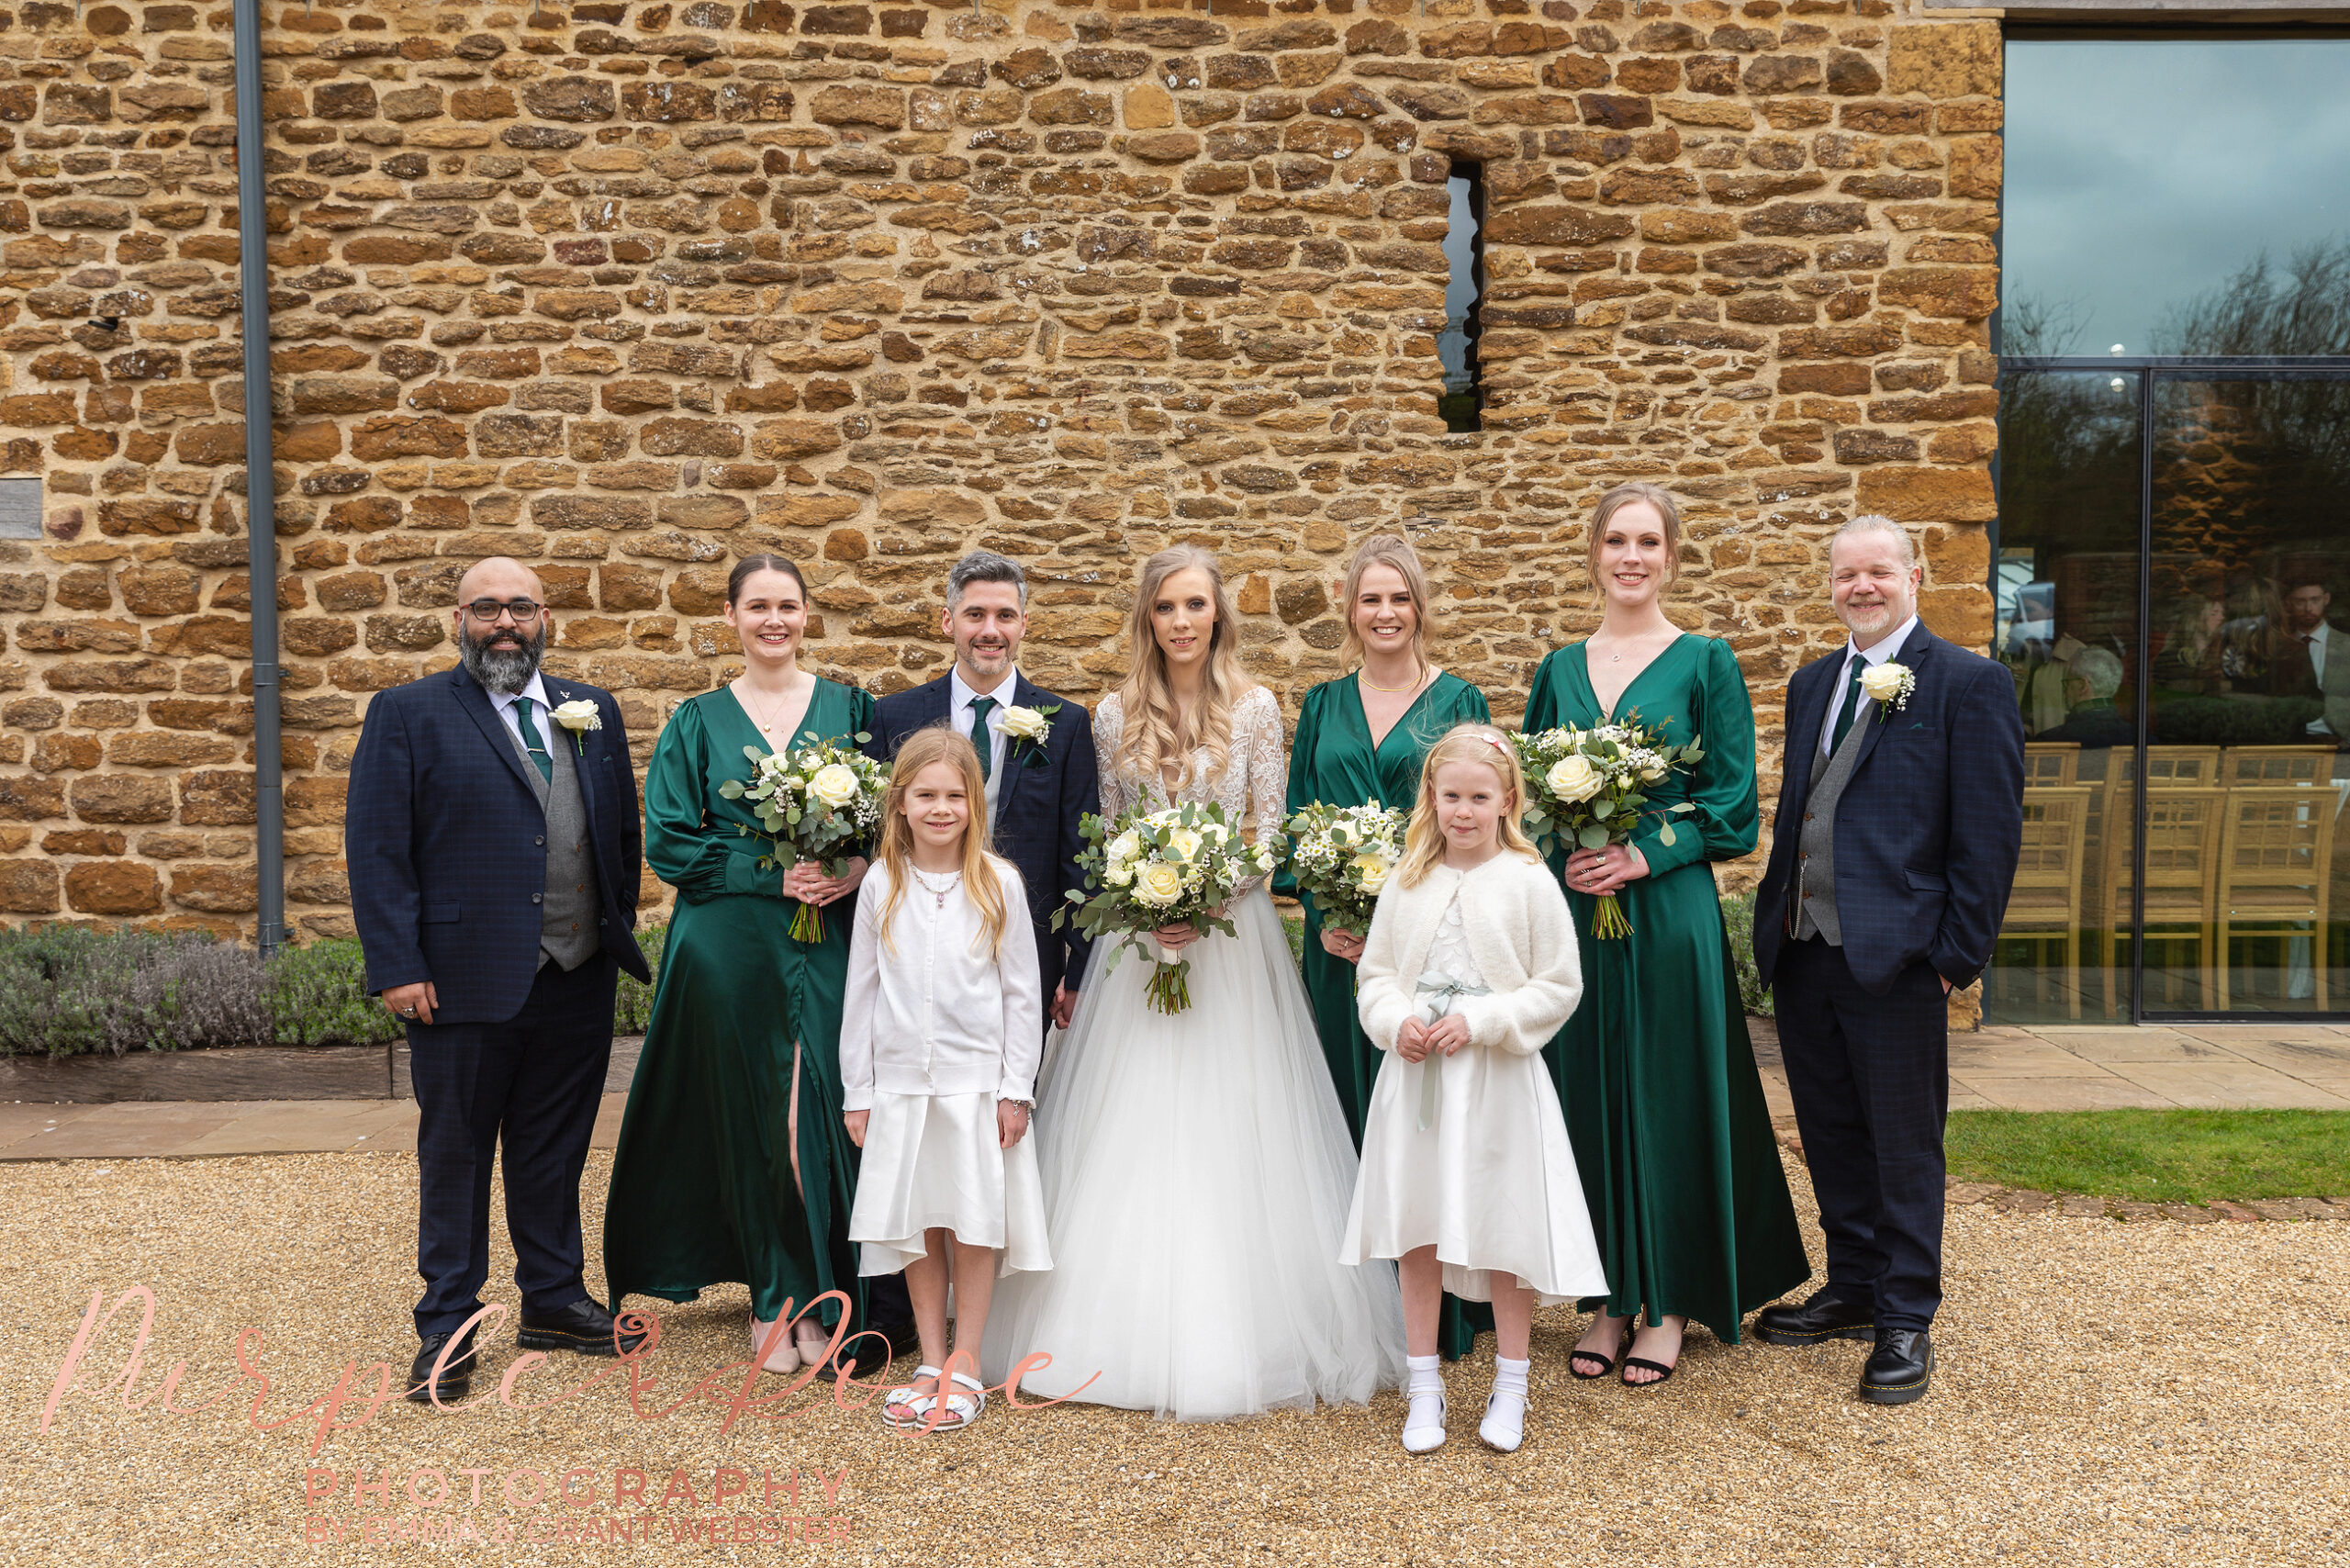 Group phot of bridal party at a wedding in Milton Keynes